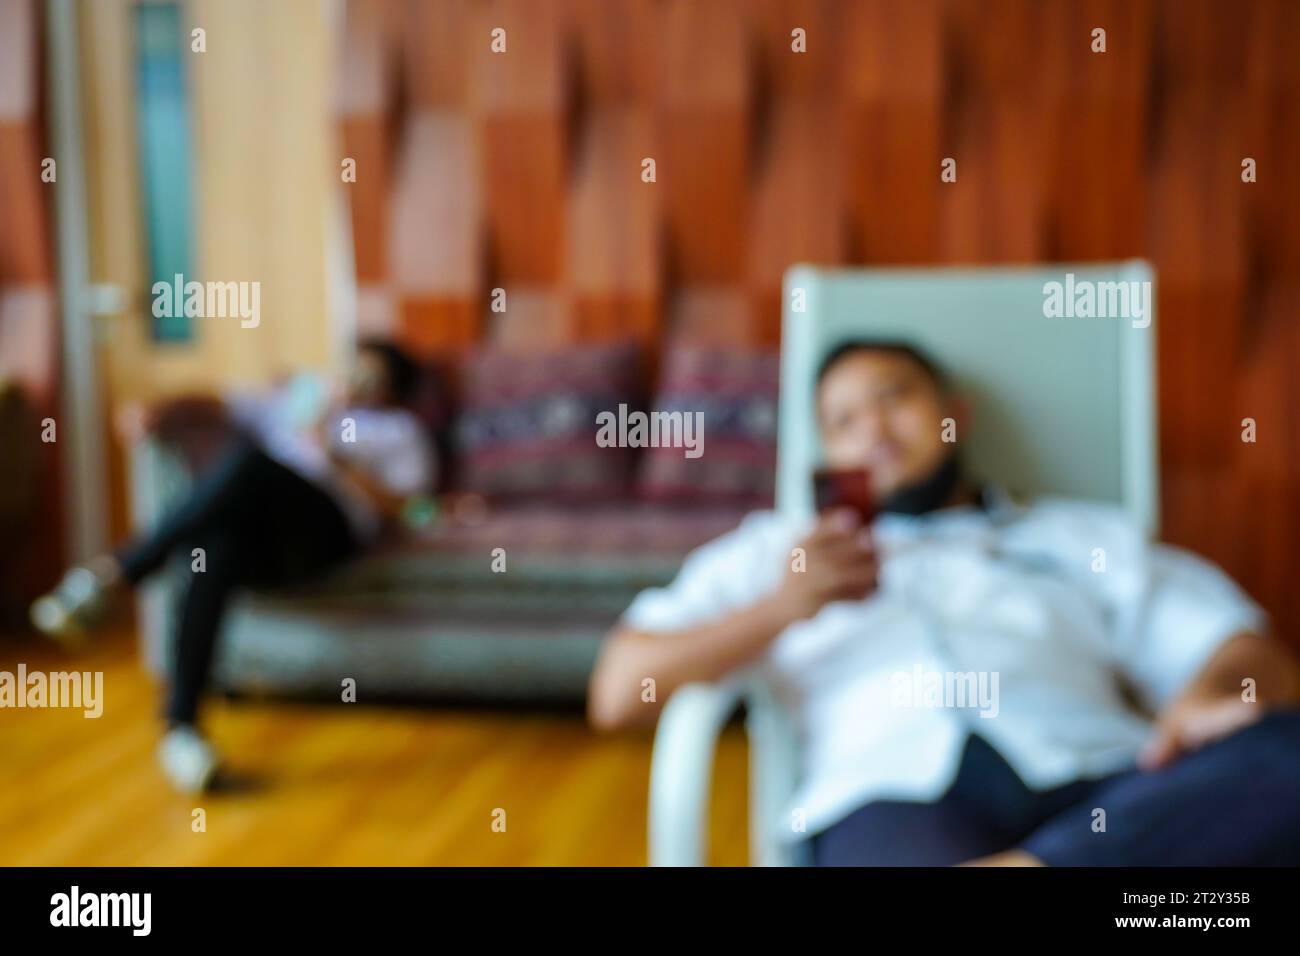 A mesmerizing blur composition capturing the dynamic scene of two men engrossed in using their smartphones while seated on chairs and a sofa Stock Photo